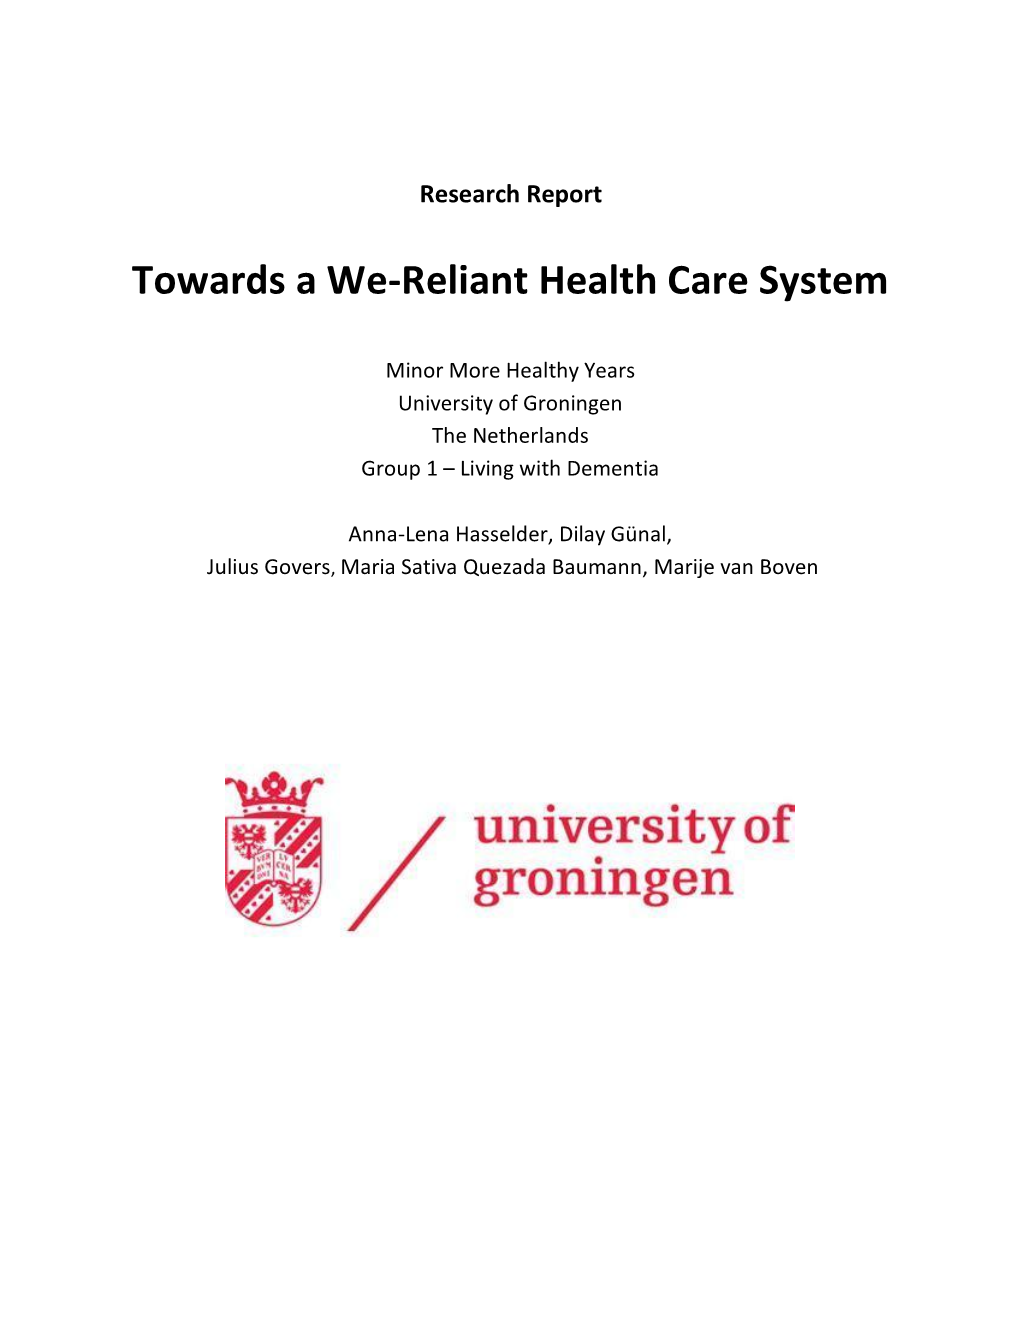 Towards a We-Reliant Health Care System